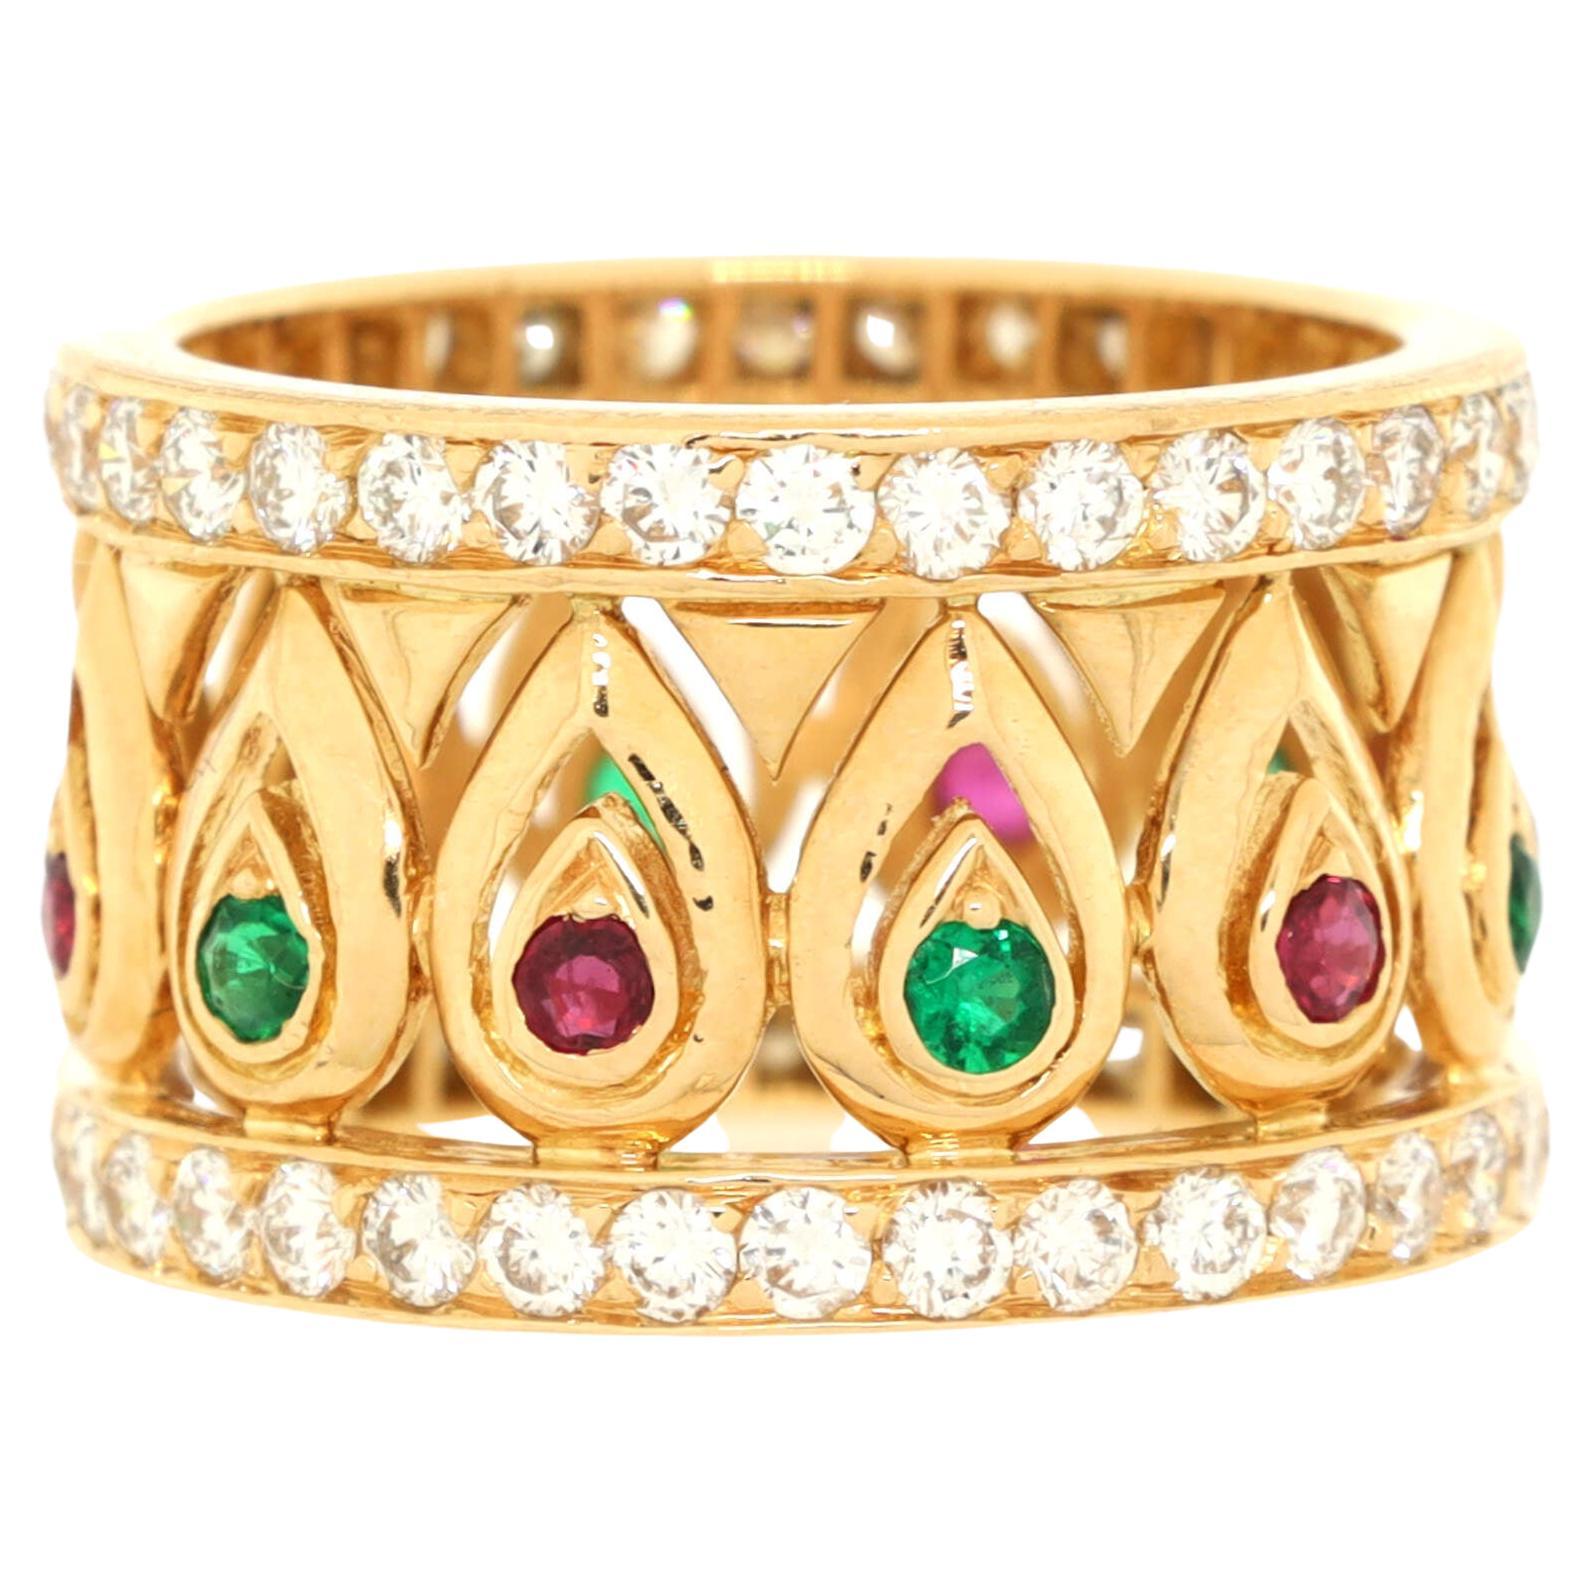 Cartier Tanjore Band Ring 18K Yellow Gold with Rubies, Emeralds and Pave  For Sale